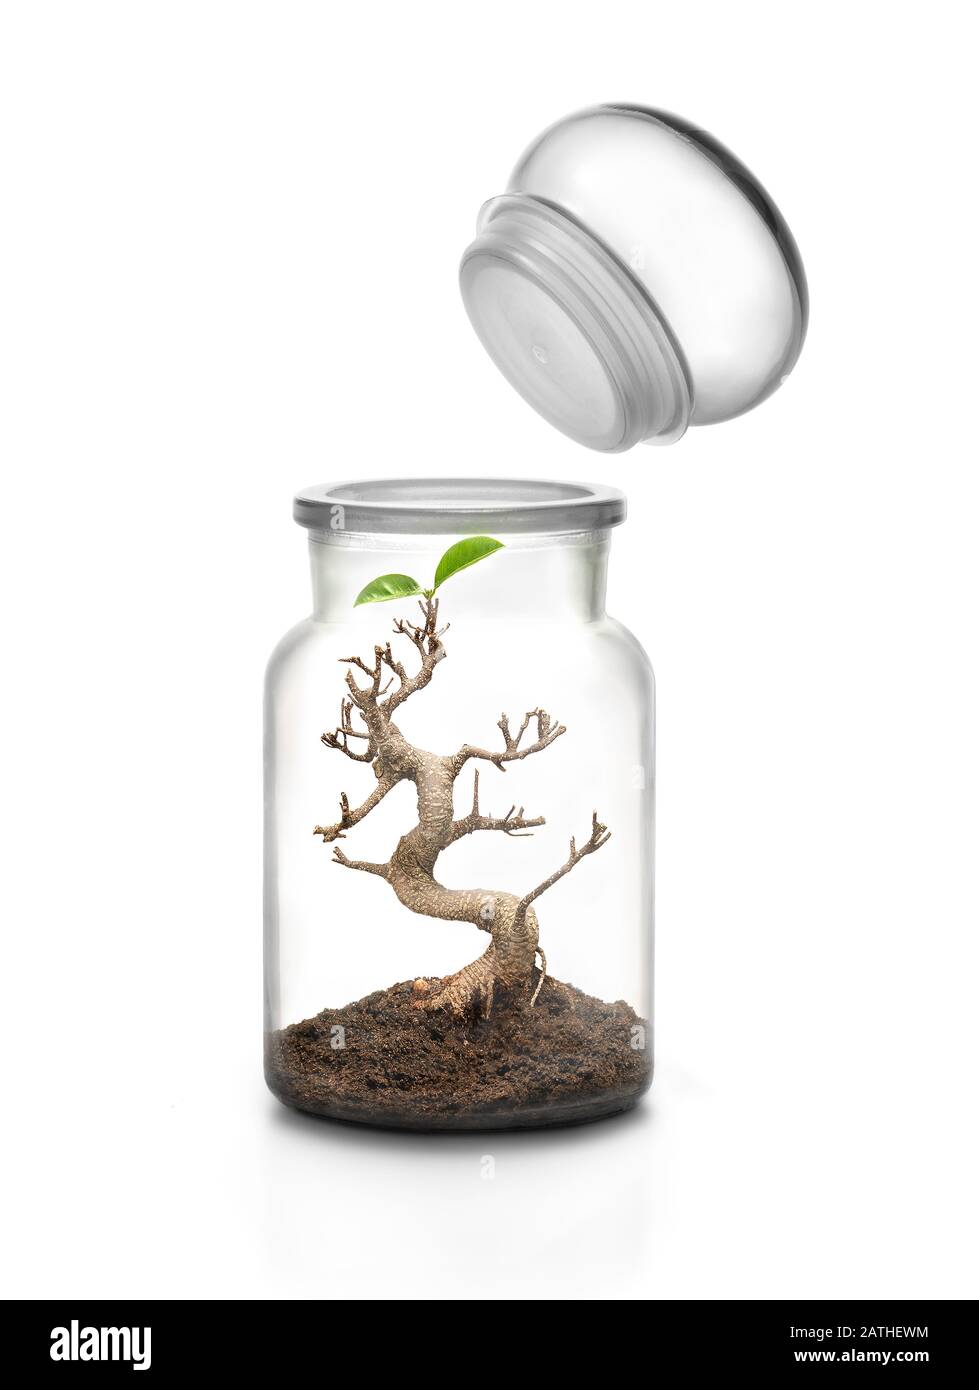 Life protection concept. Glass jar with cap and bonsai growing with soil  inside Stock Photo